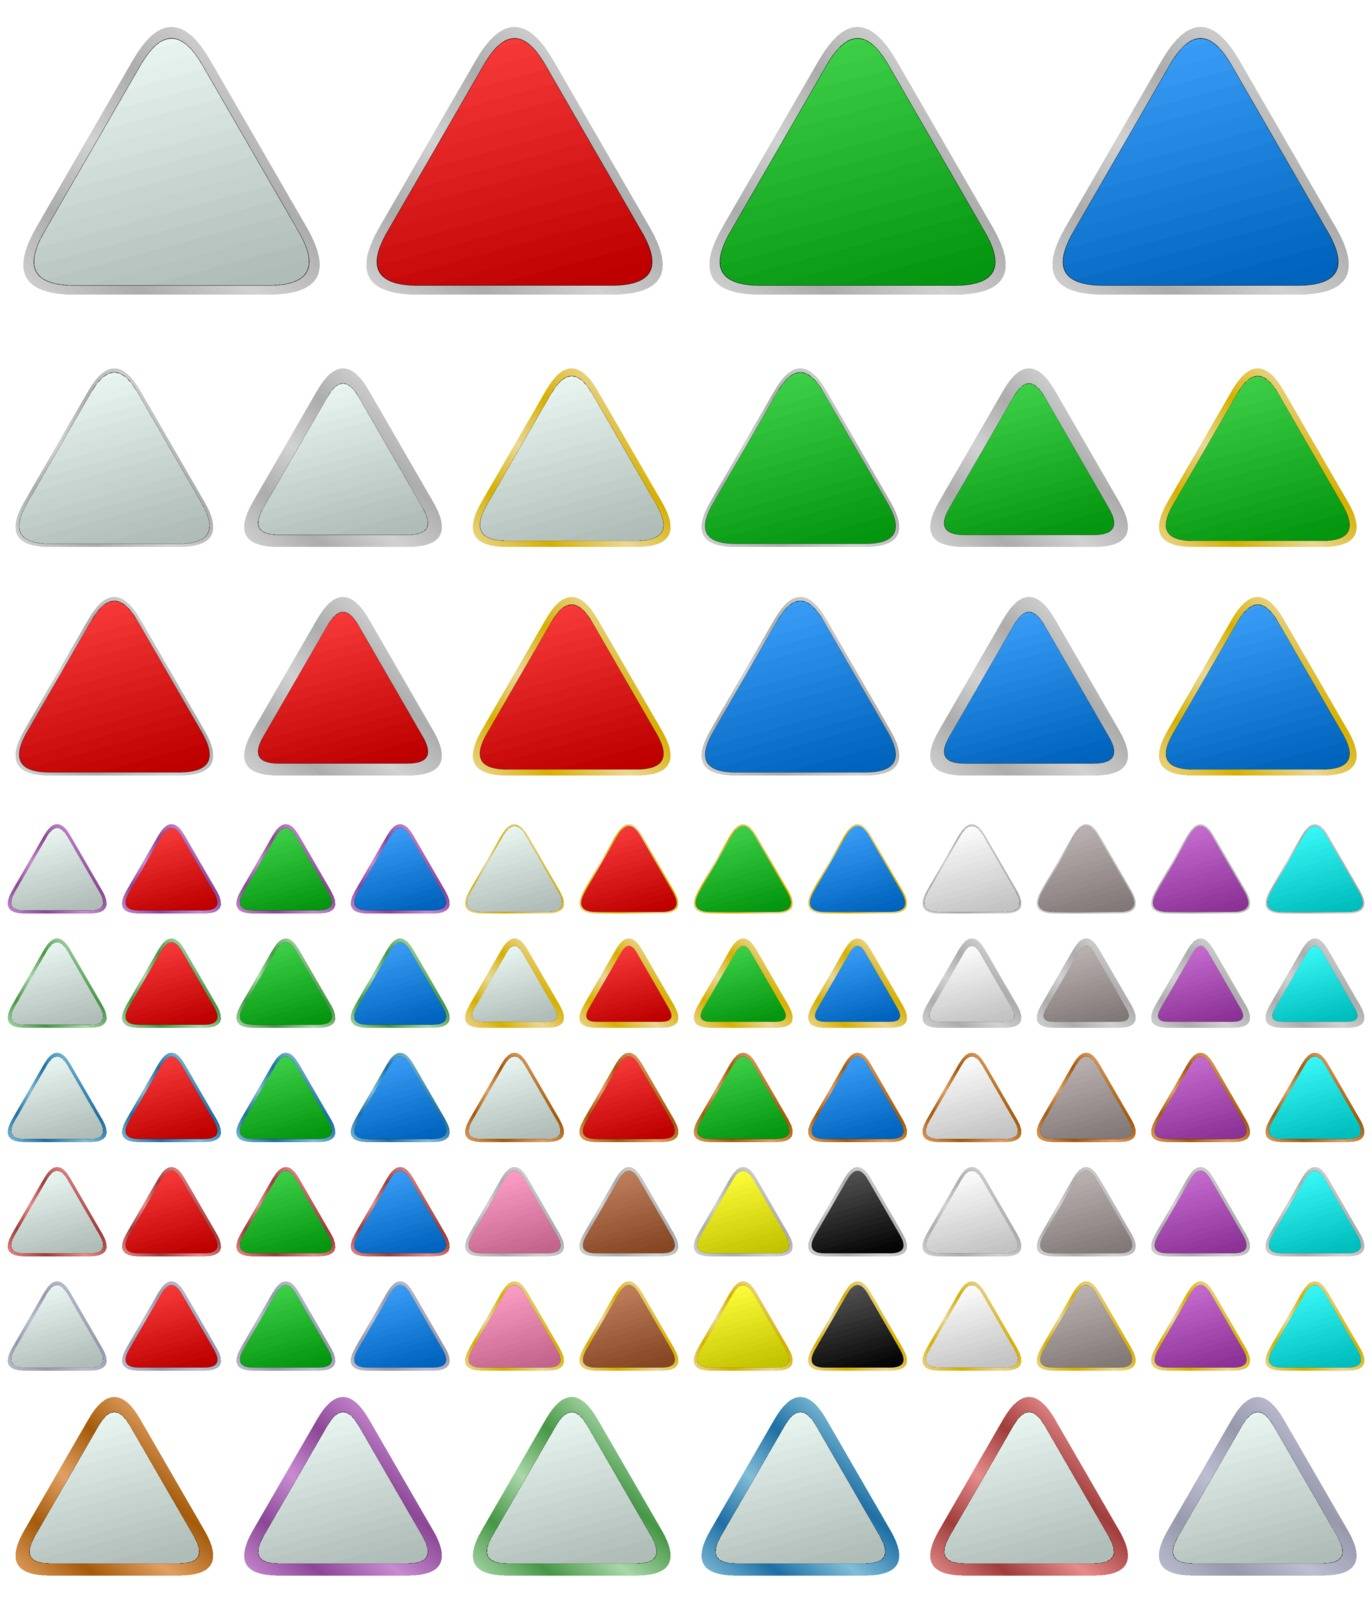 Color metallic rounded triangle button set by davidzydd